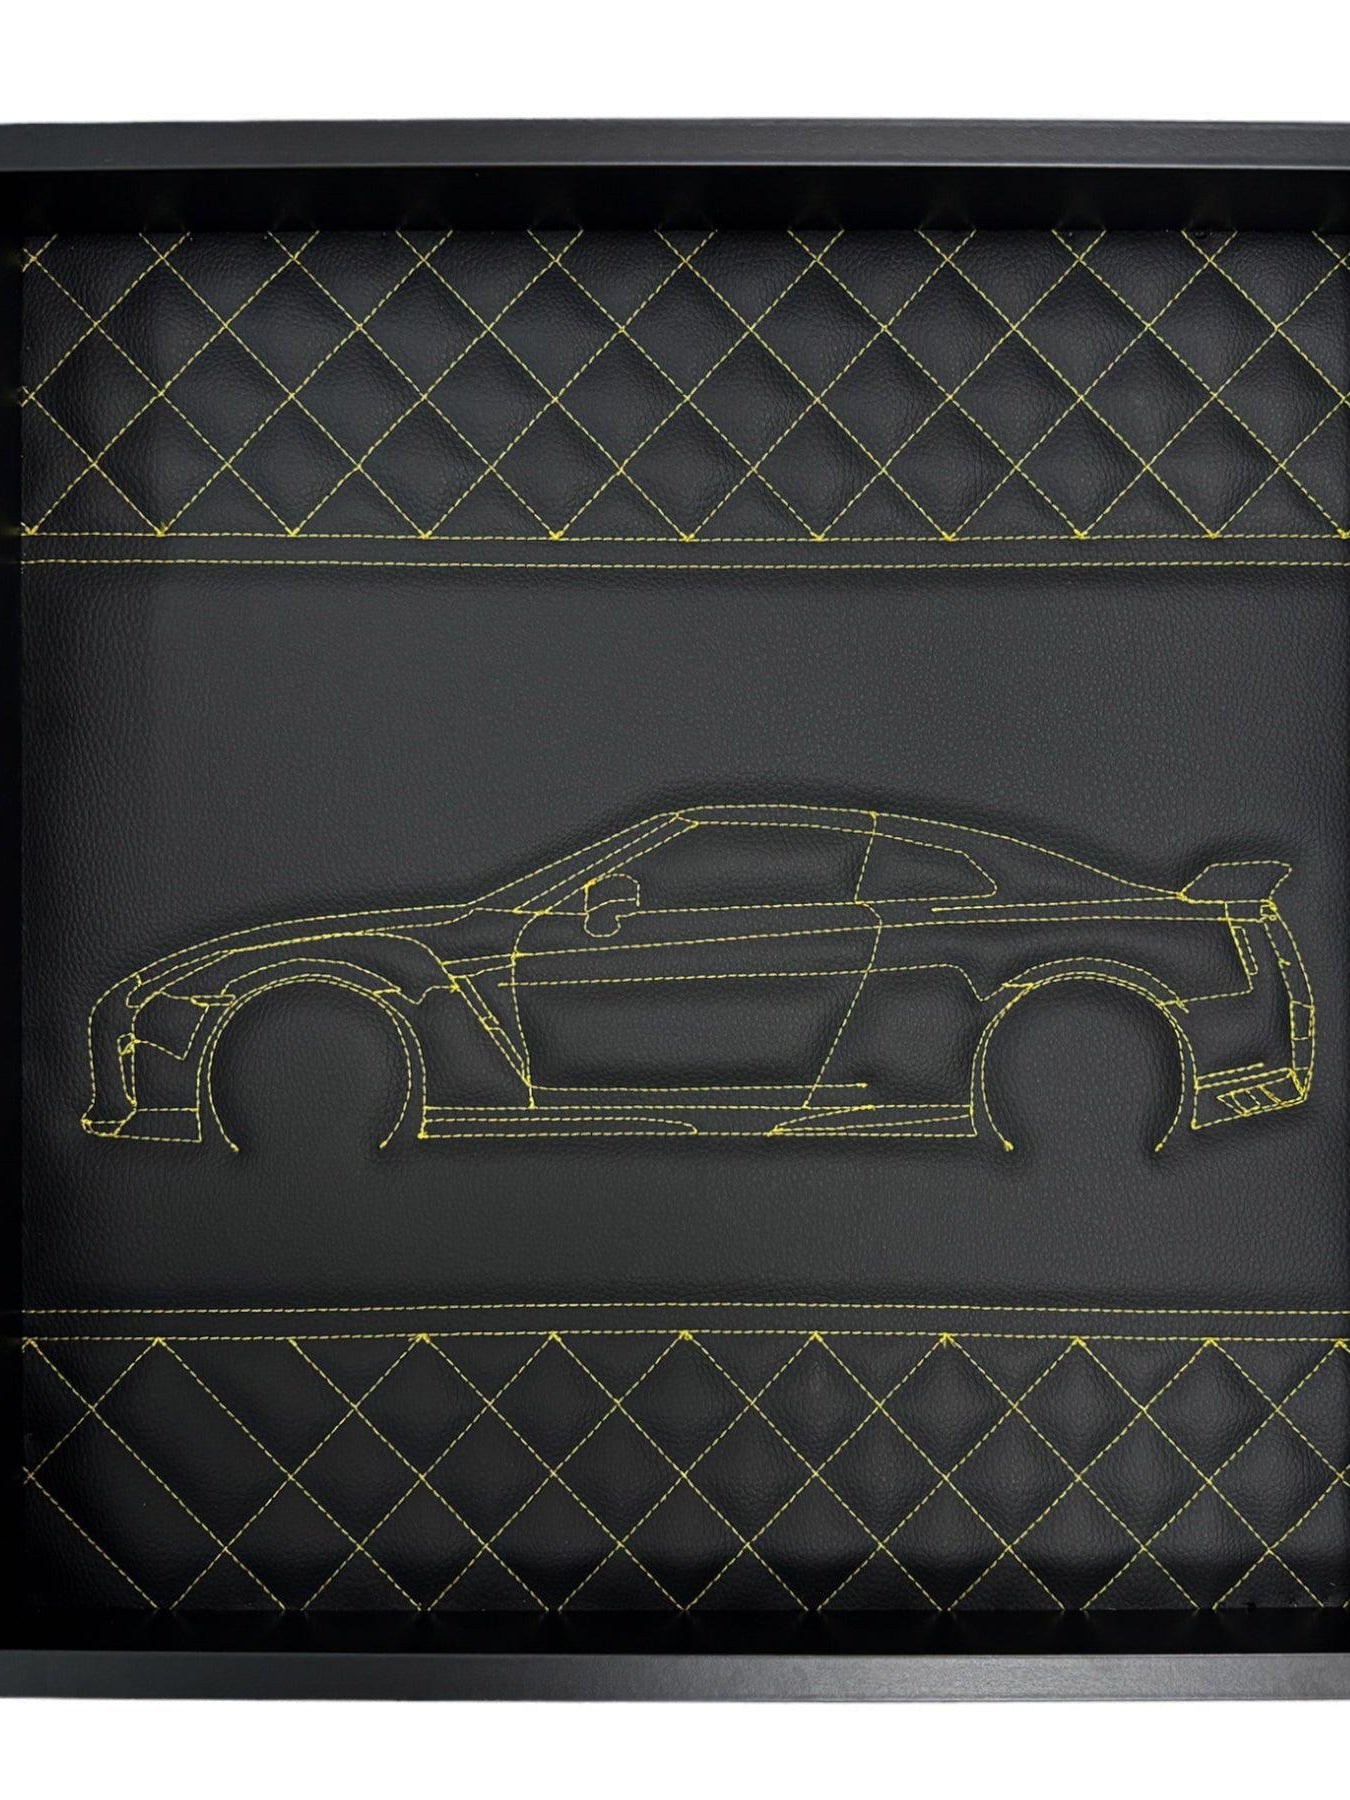 Black Leather Nissan GTR Inspired Wall Art: Embroidered Yellow Stitch Luxury Decor